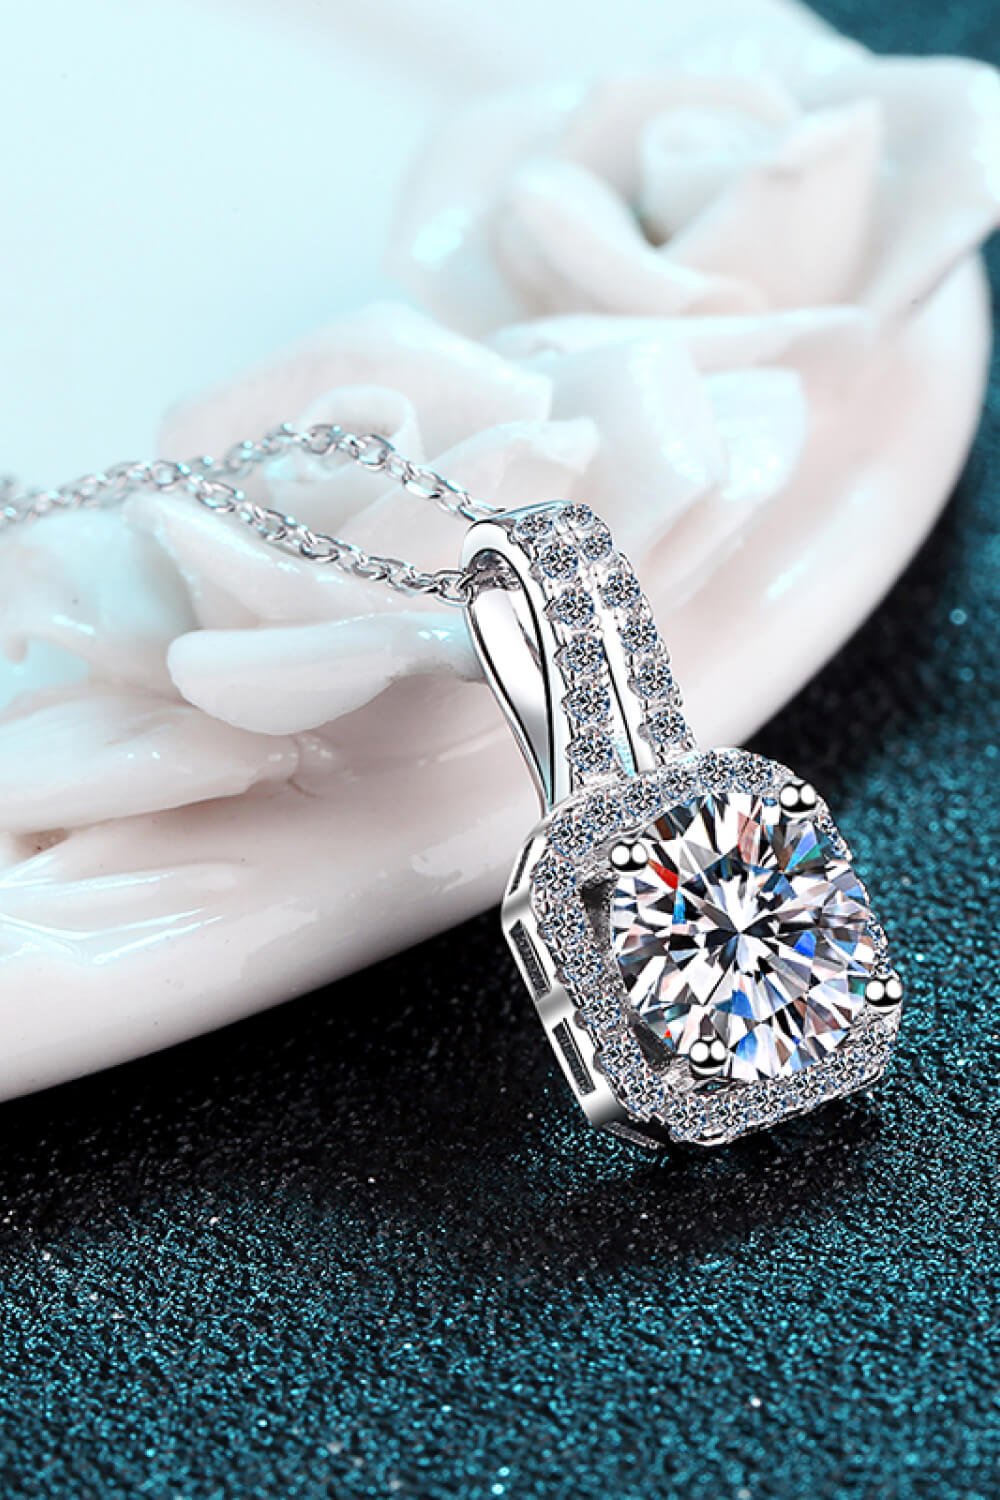 "Enchanting Love: 1 Carat Moissanite Necklace - Experience the Magic of Our Breathtaking Stone and Adorn Your Love with Elegance" - Guy Christopher